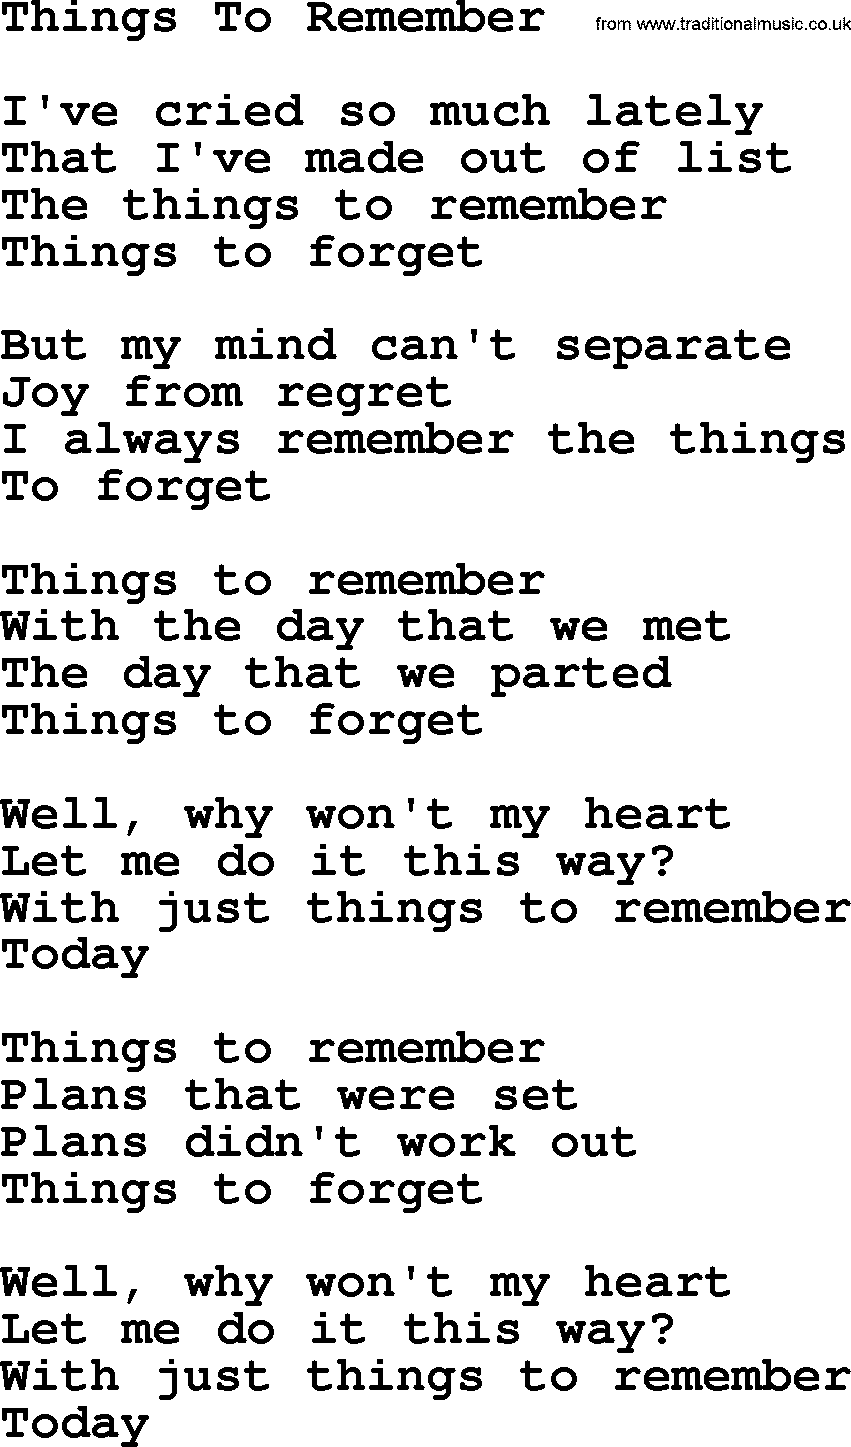 Willie Nelson song: Things To Remember lyrics